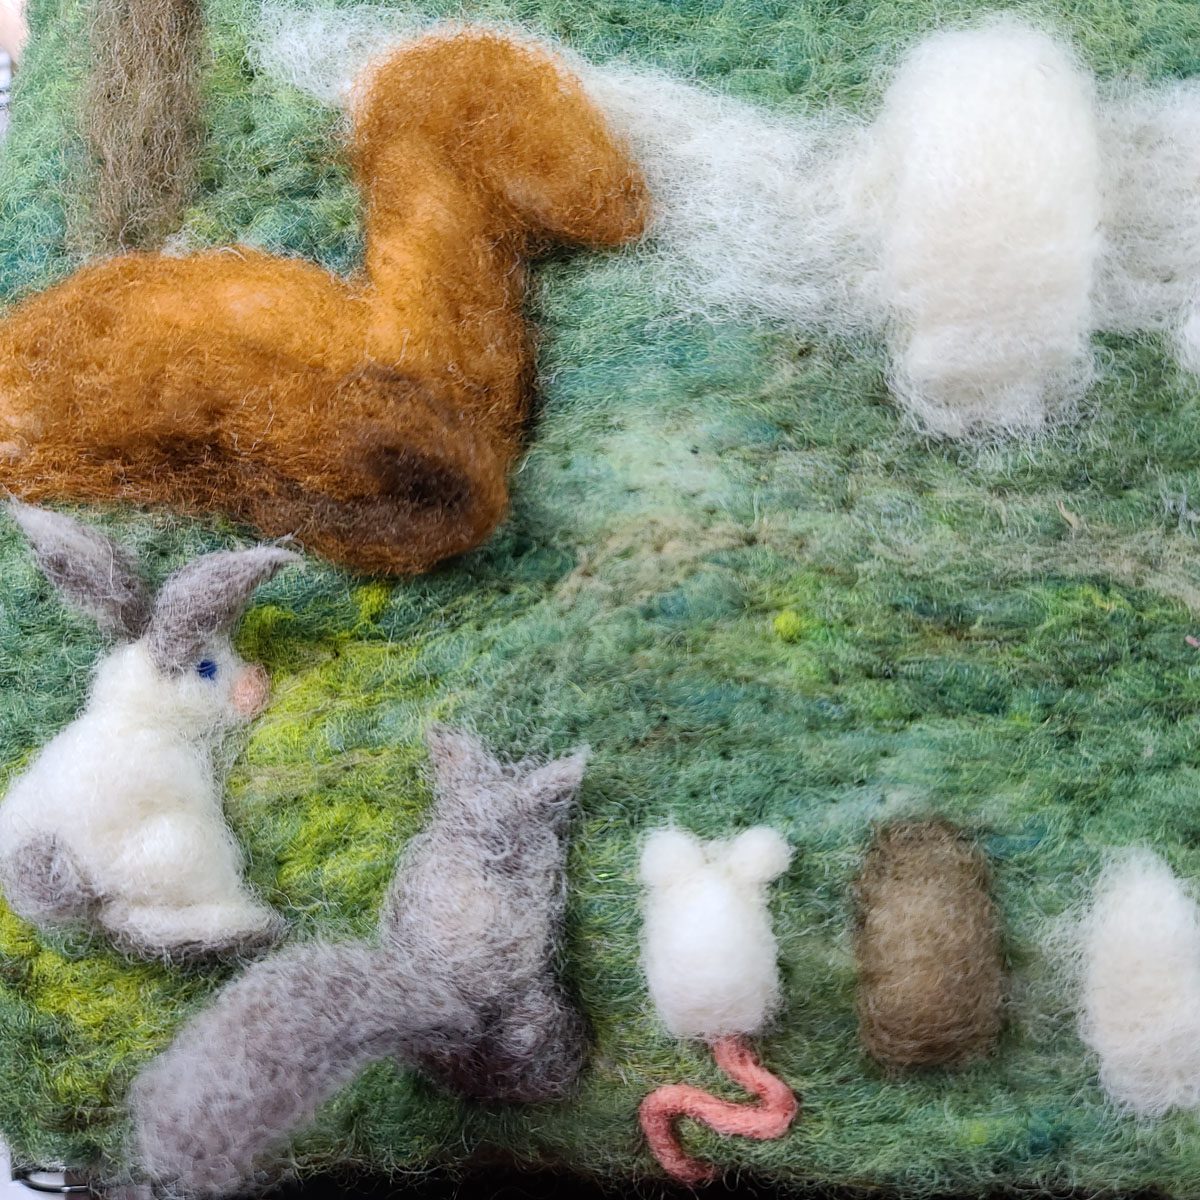 Needle felting a 2D squirrel with a 3D tail that pops, video tutorial